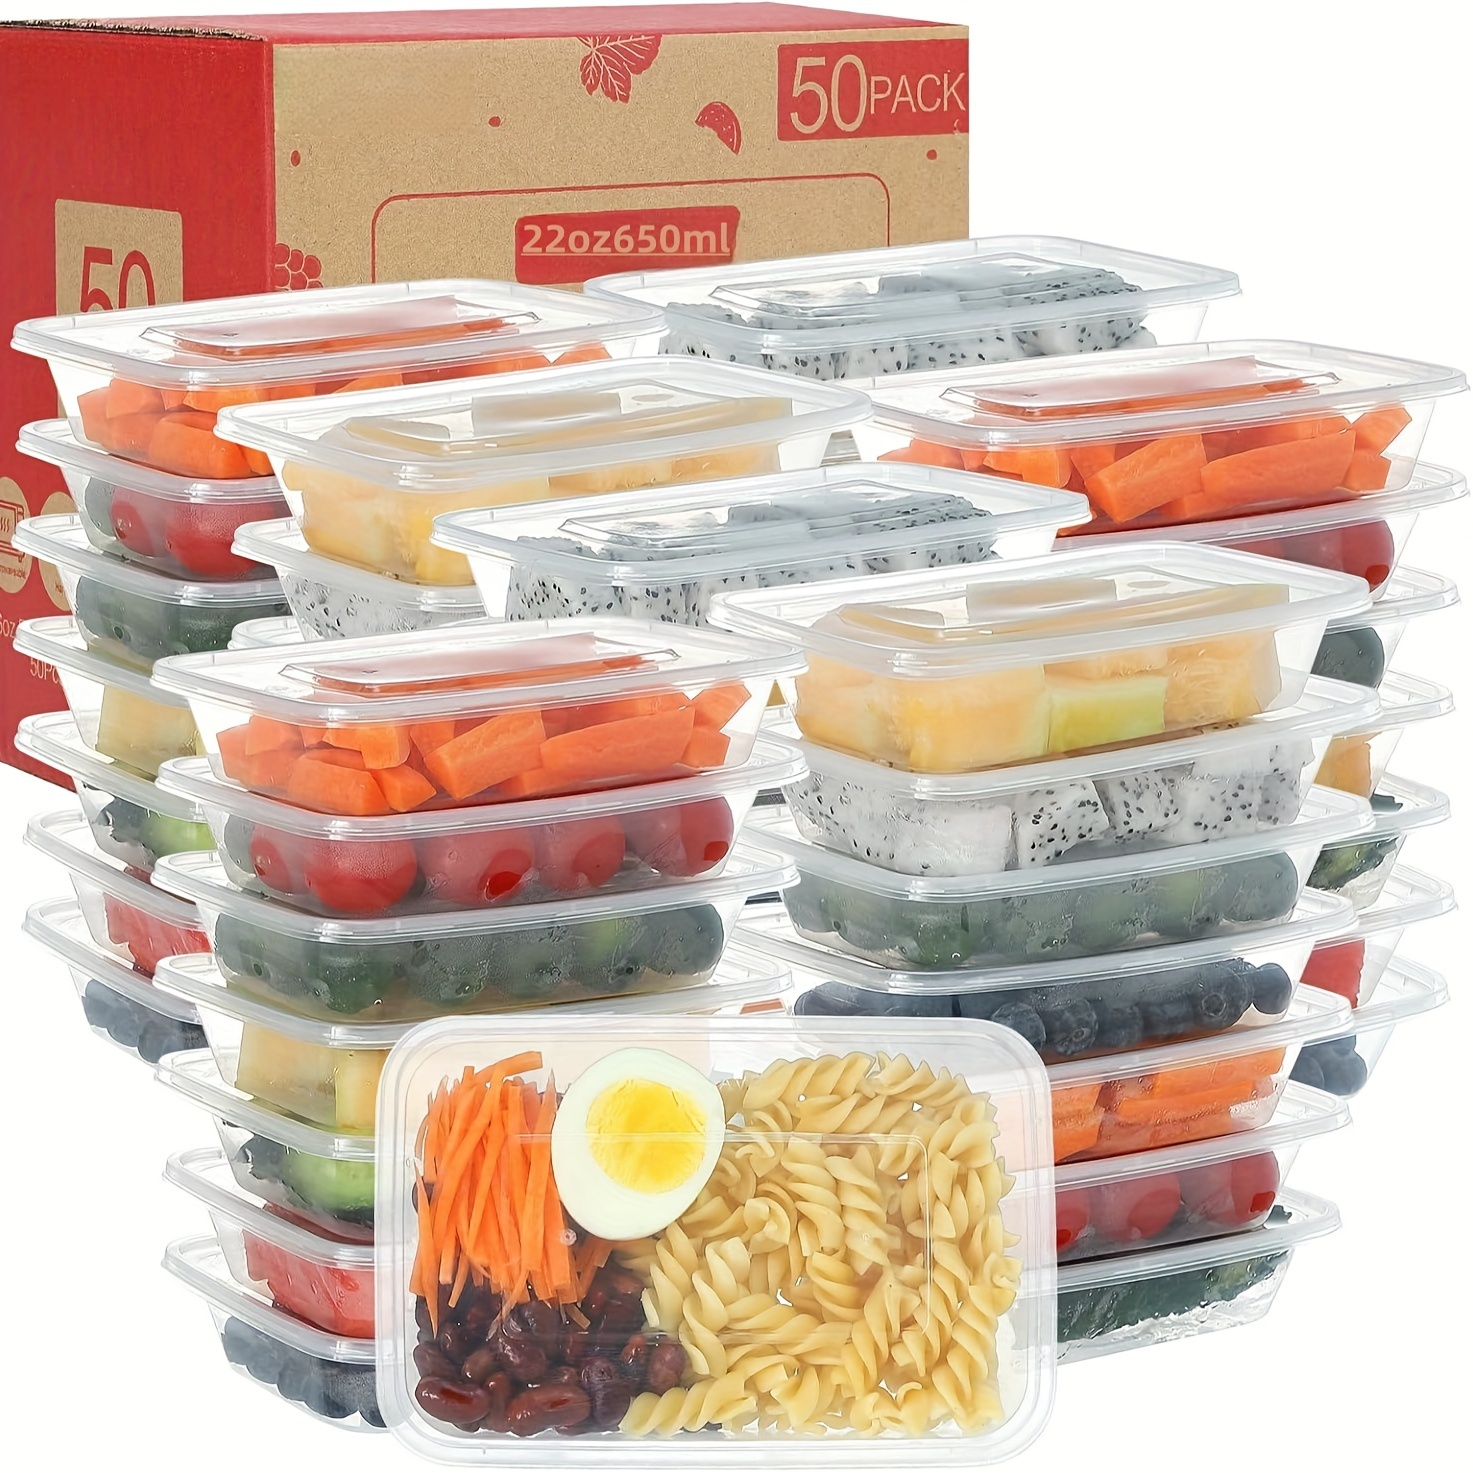 Food Storage Containers 50 Pack with Lids, Kitchen Airtight Meal